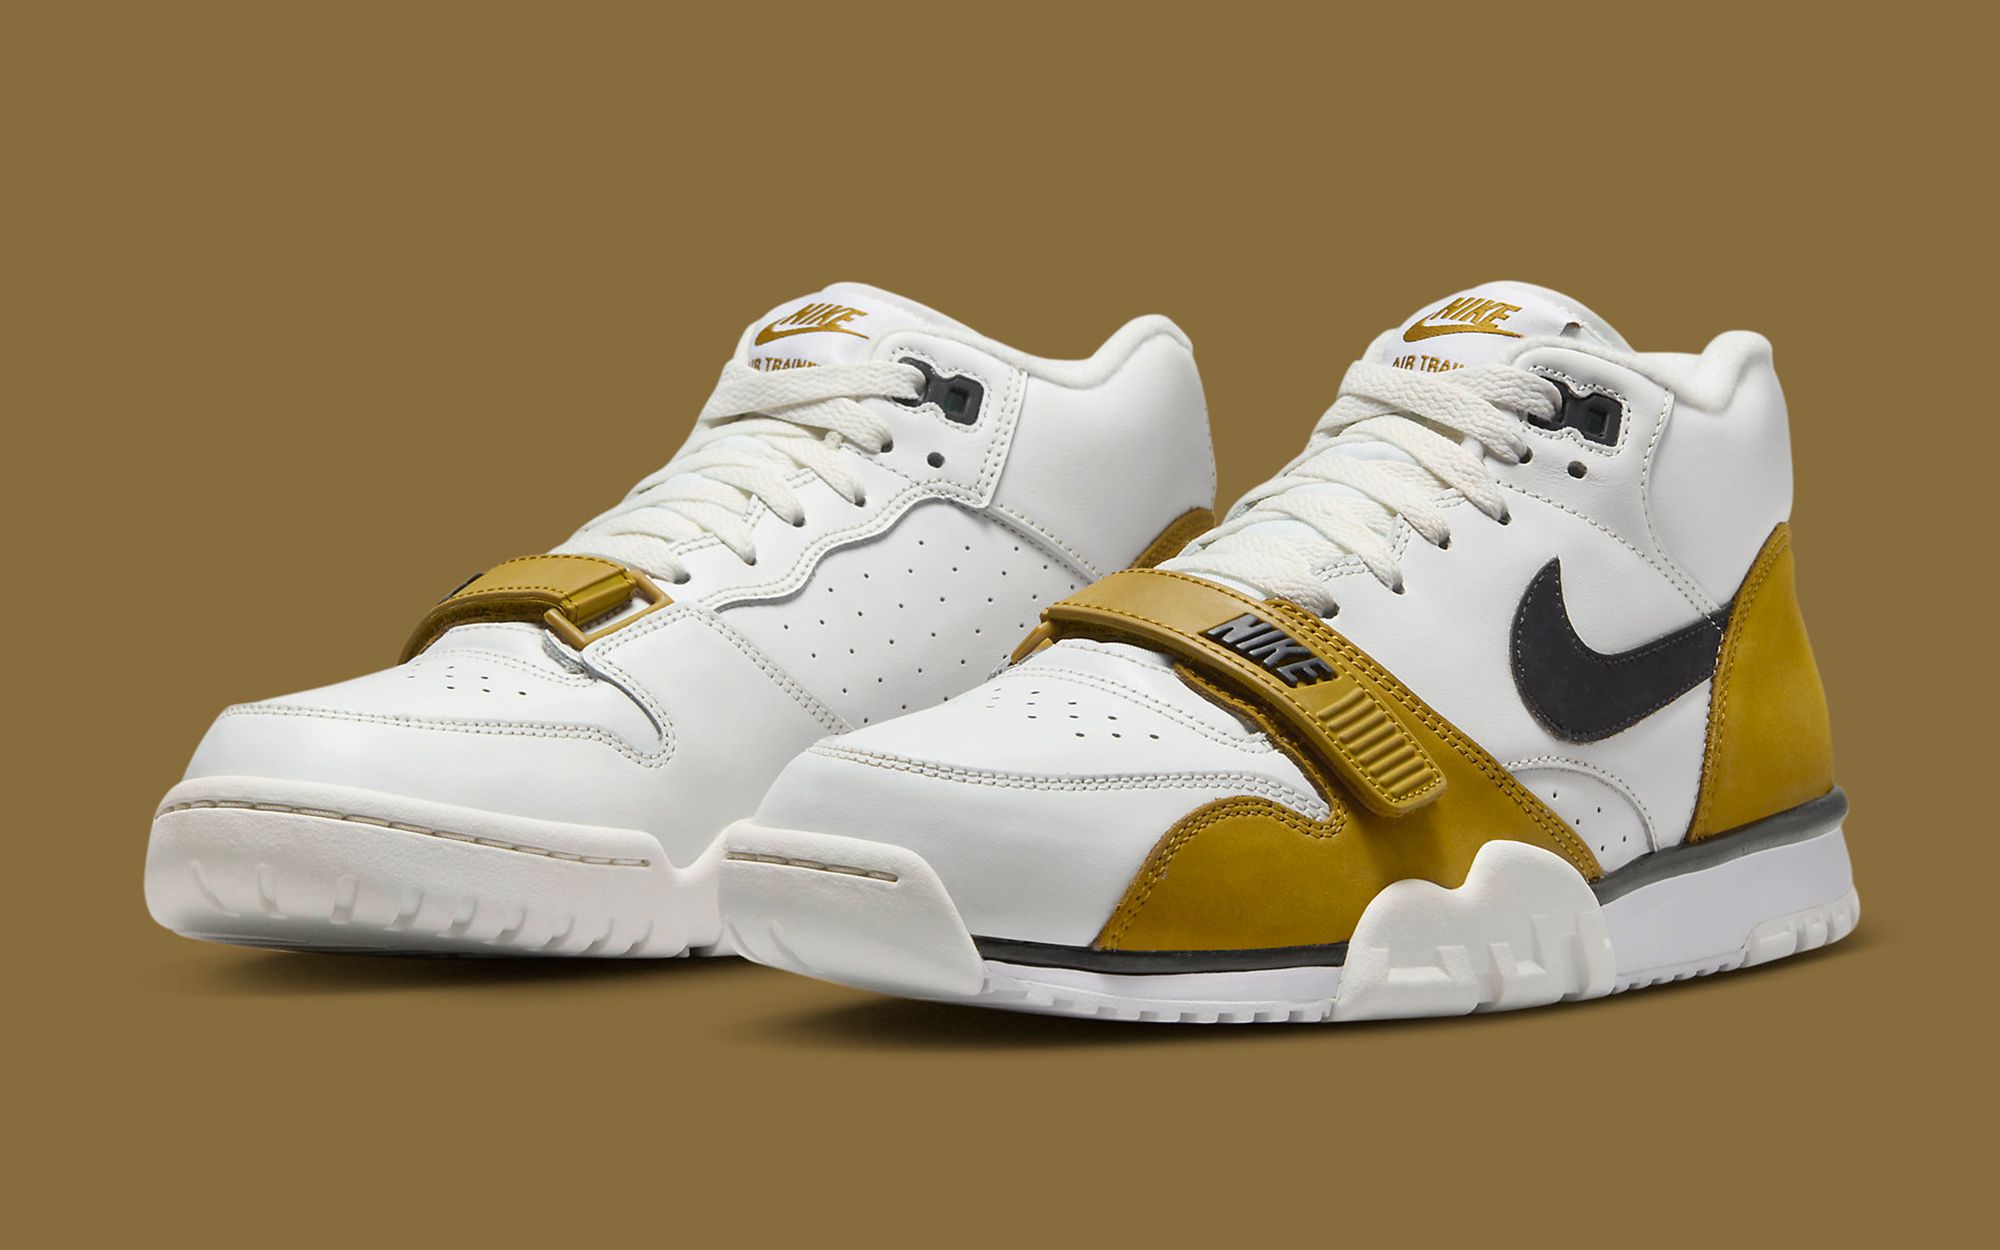 The Nike Air Trainer 1 Appears in White and Wheat for Fall | House